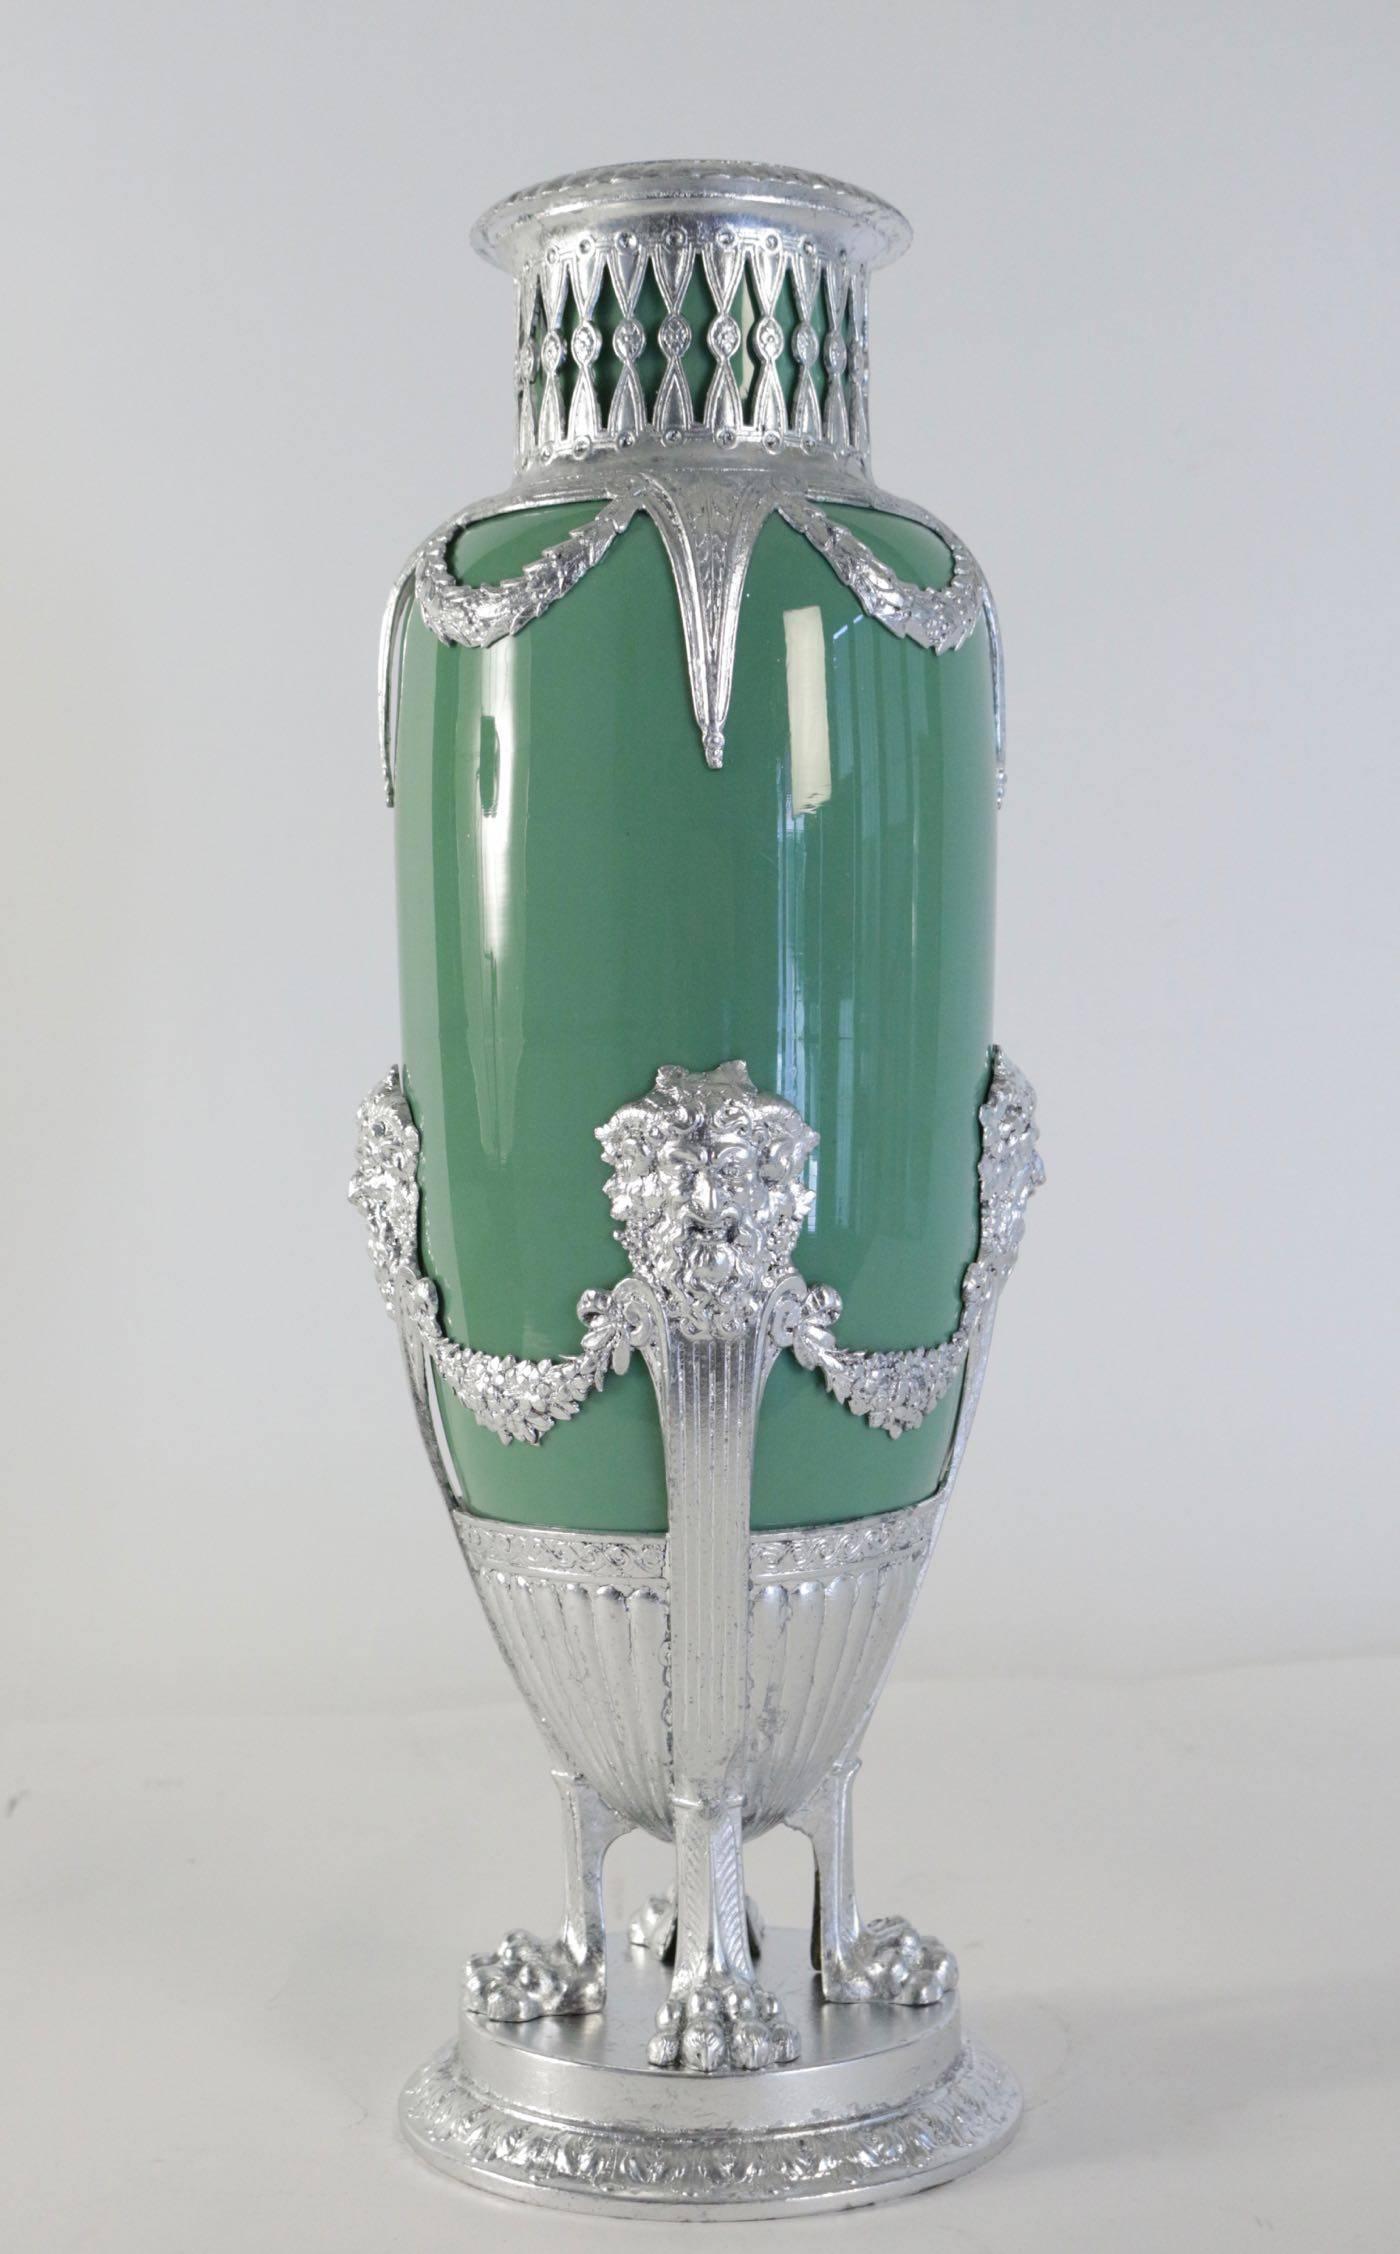 Celadon Vase in Faience, Silver Plate and Silver Leaf, 19th Century Period For Sale 2